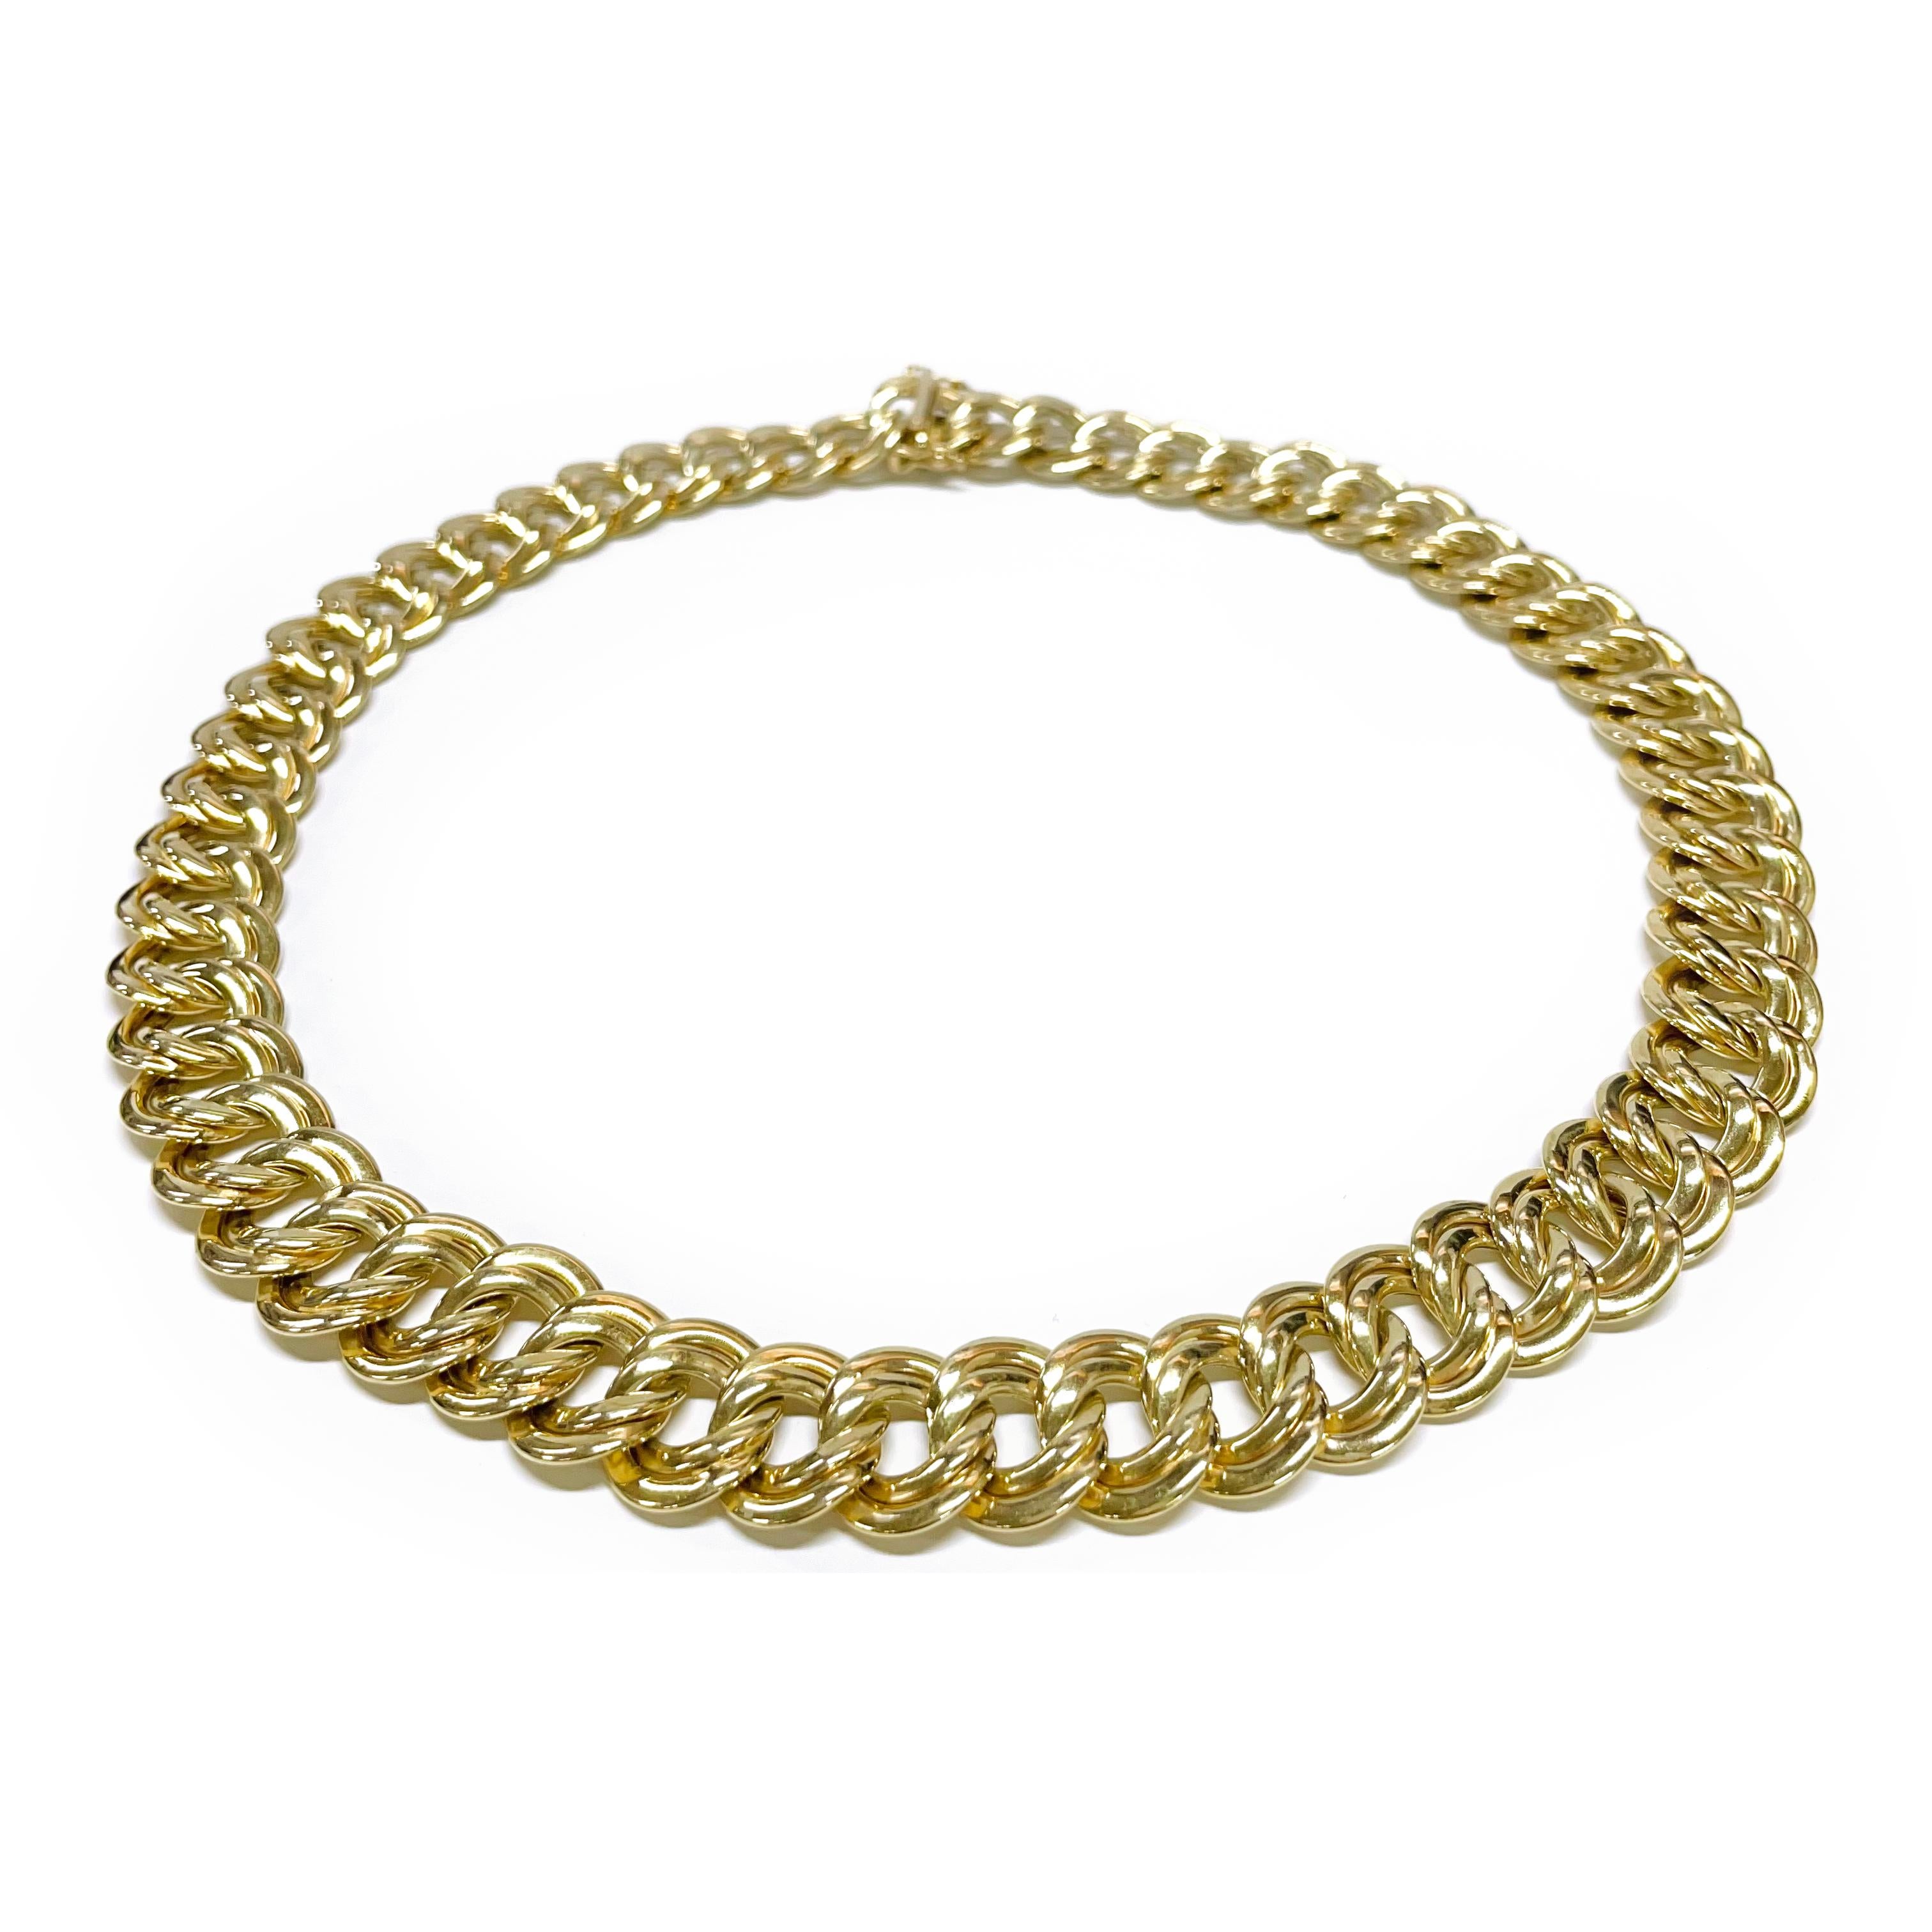 Vior 14 Karat Yellow Gold Double Link Necklace. The necklace feature gold double links, it's 14.5mm wide and 17